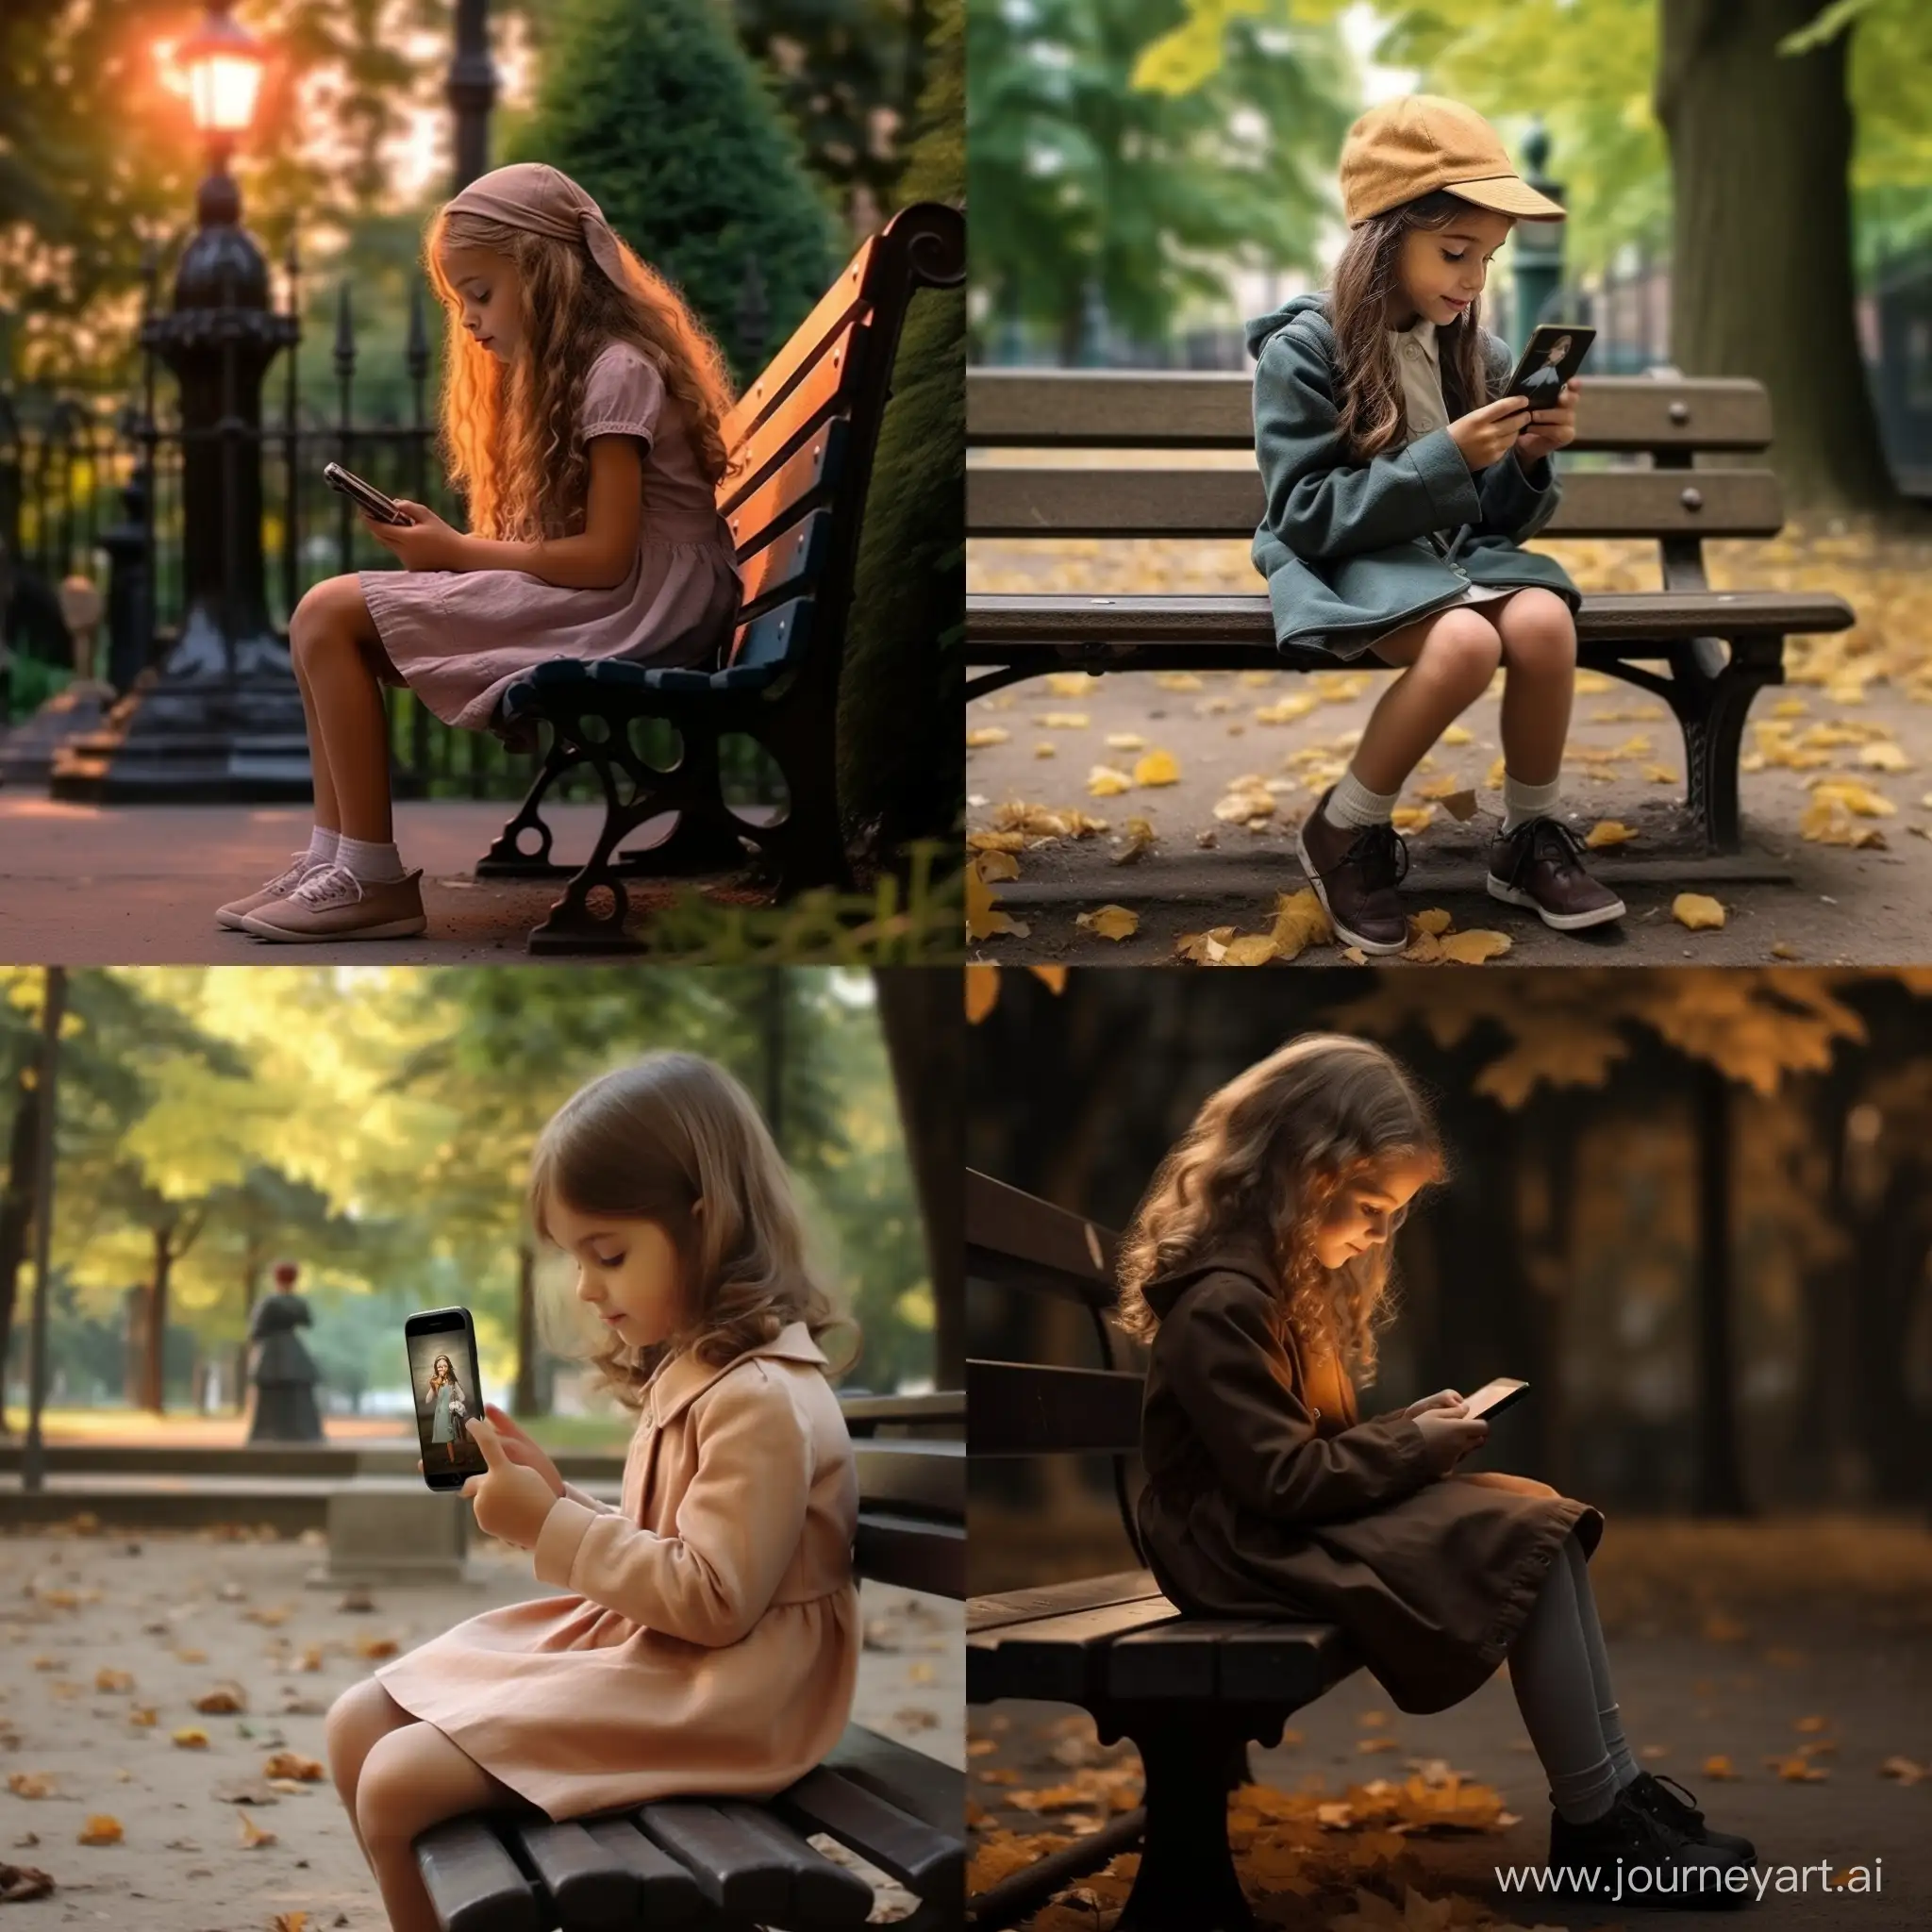 Curious-Little-Girl-Enjoying-Nature-on-Park-Bench-with-Smartphone